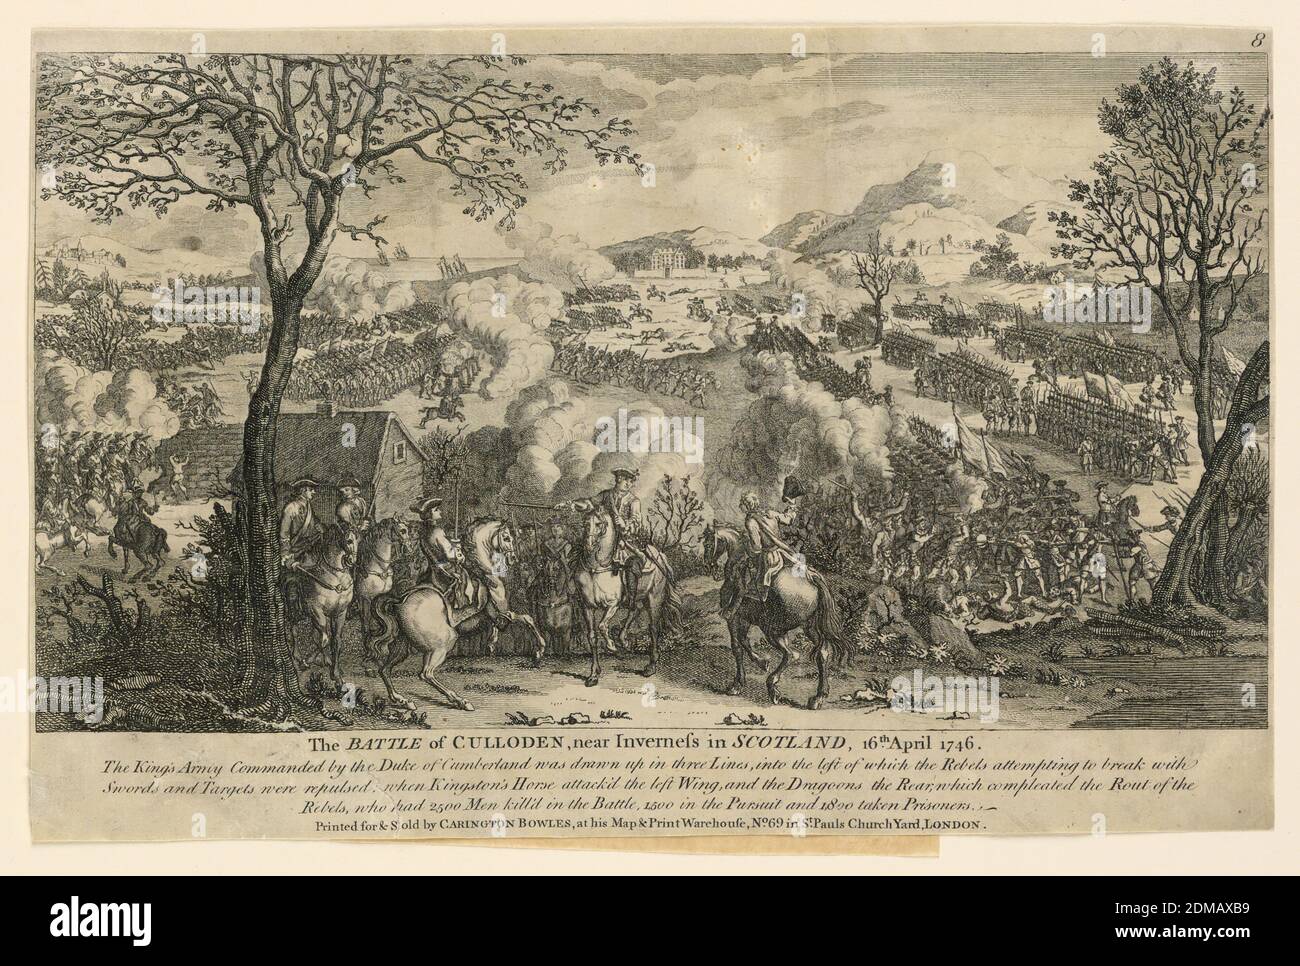 The Battles of Culloden, Scotland, Carington Bowles, British, 1724 - 1793, Engraving on paper, A mounted general salutes his officers in the foreground. In the distance massed troops in formation are in battle. Ships in the left distance., London, England, ca. 1760-1770, Print Stock Photo